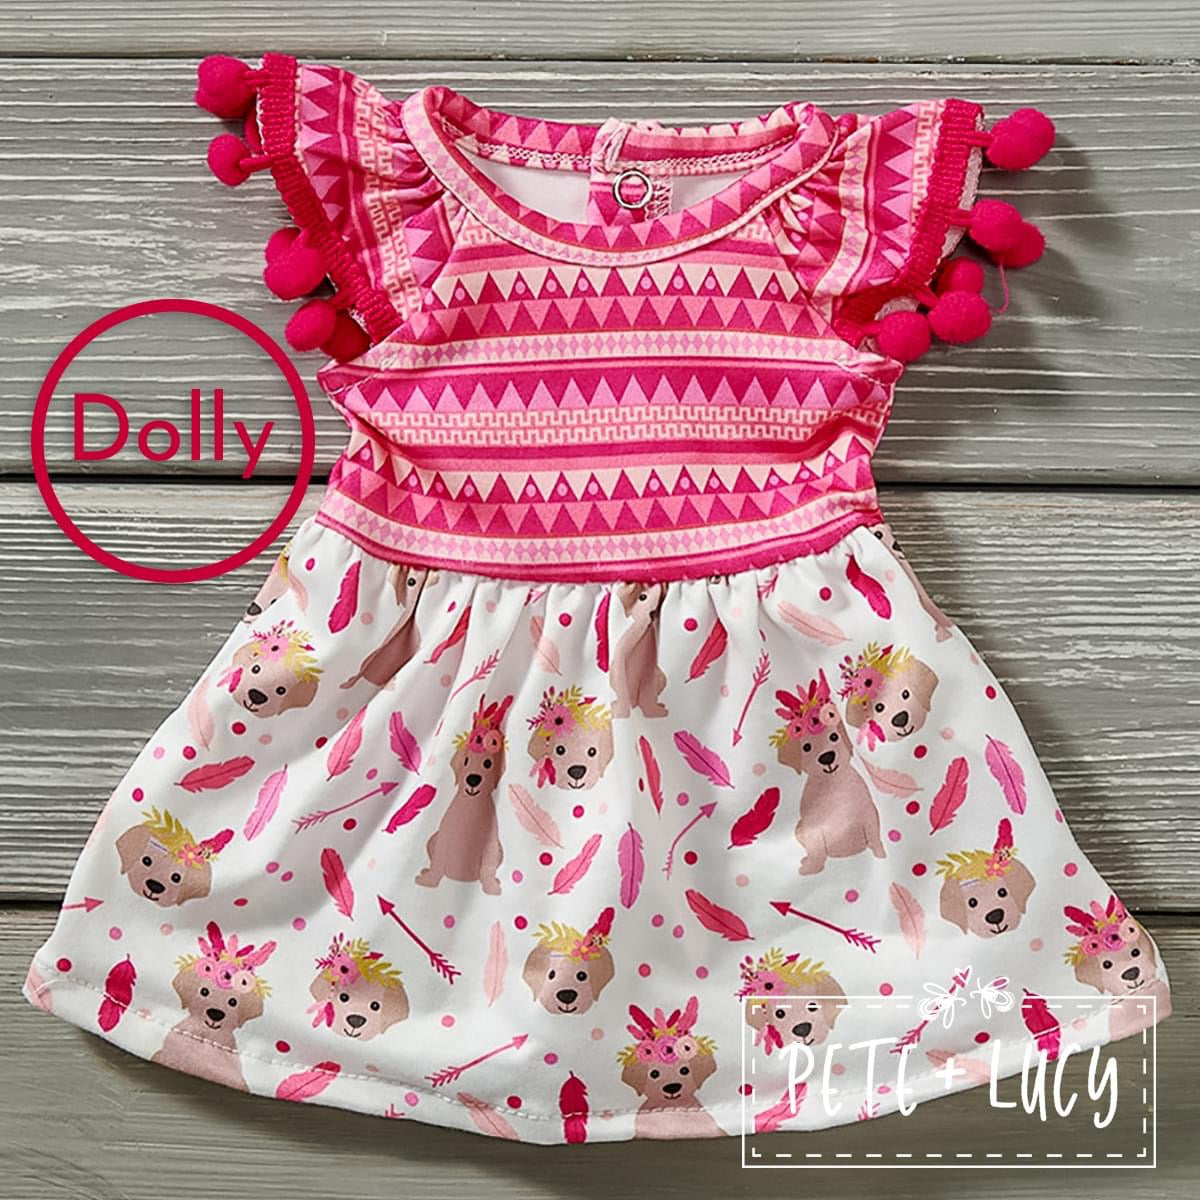 Boho Dog Dolly Dress by Pete and Lucy